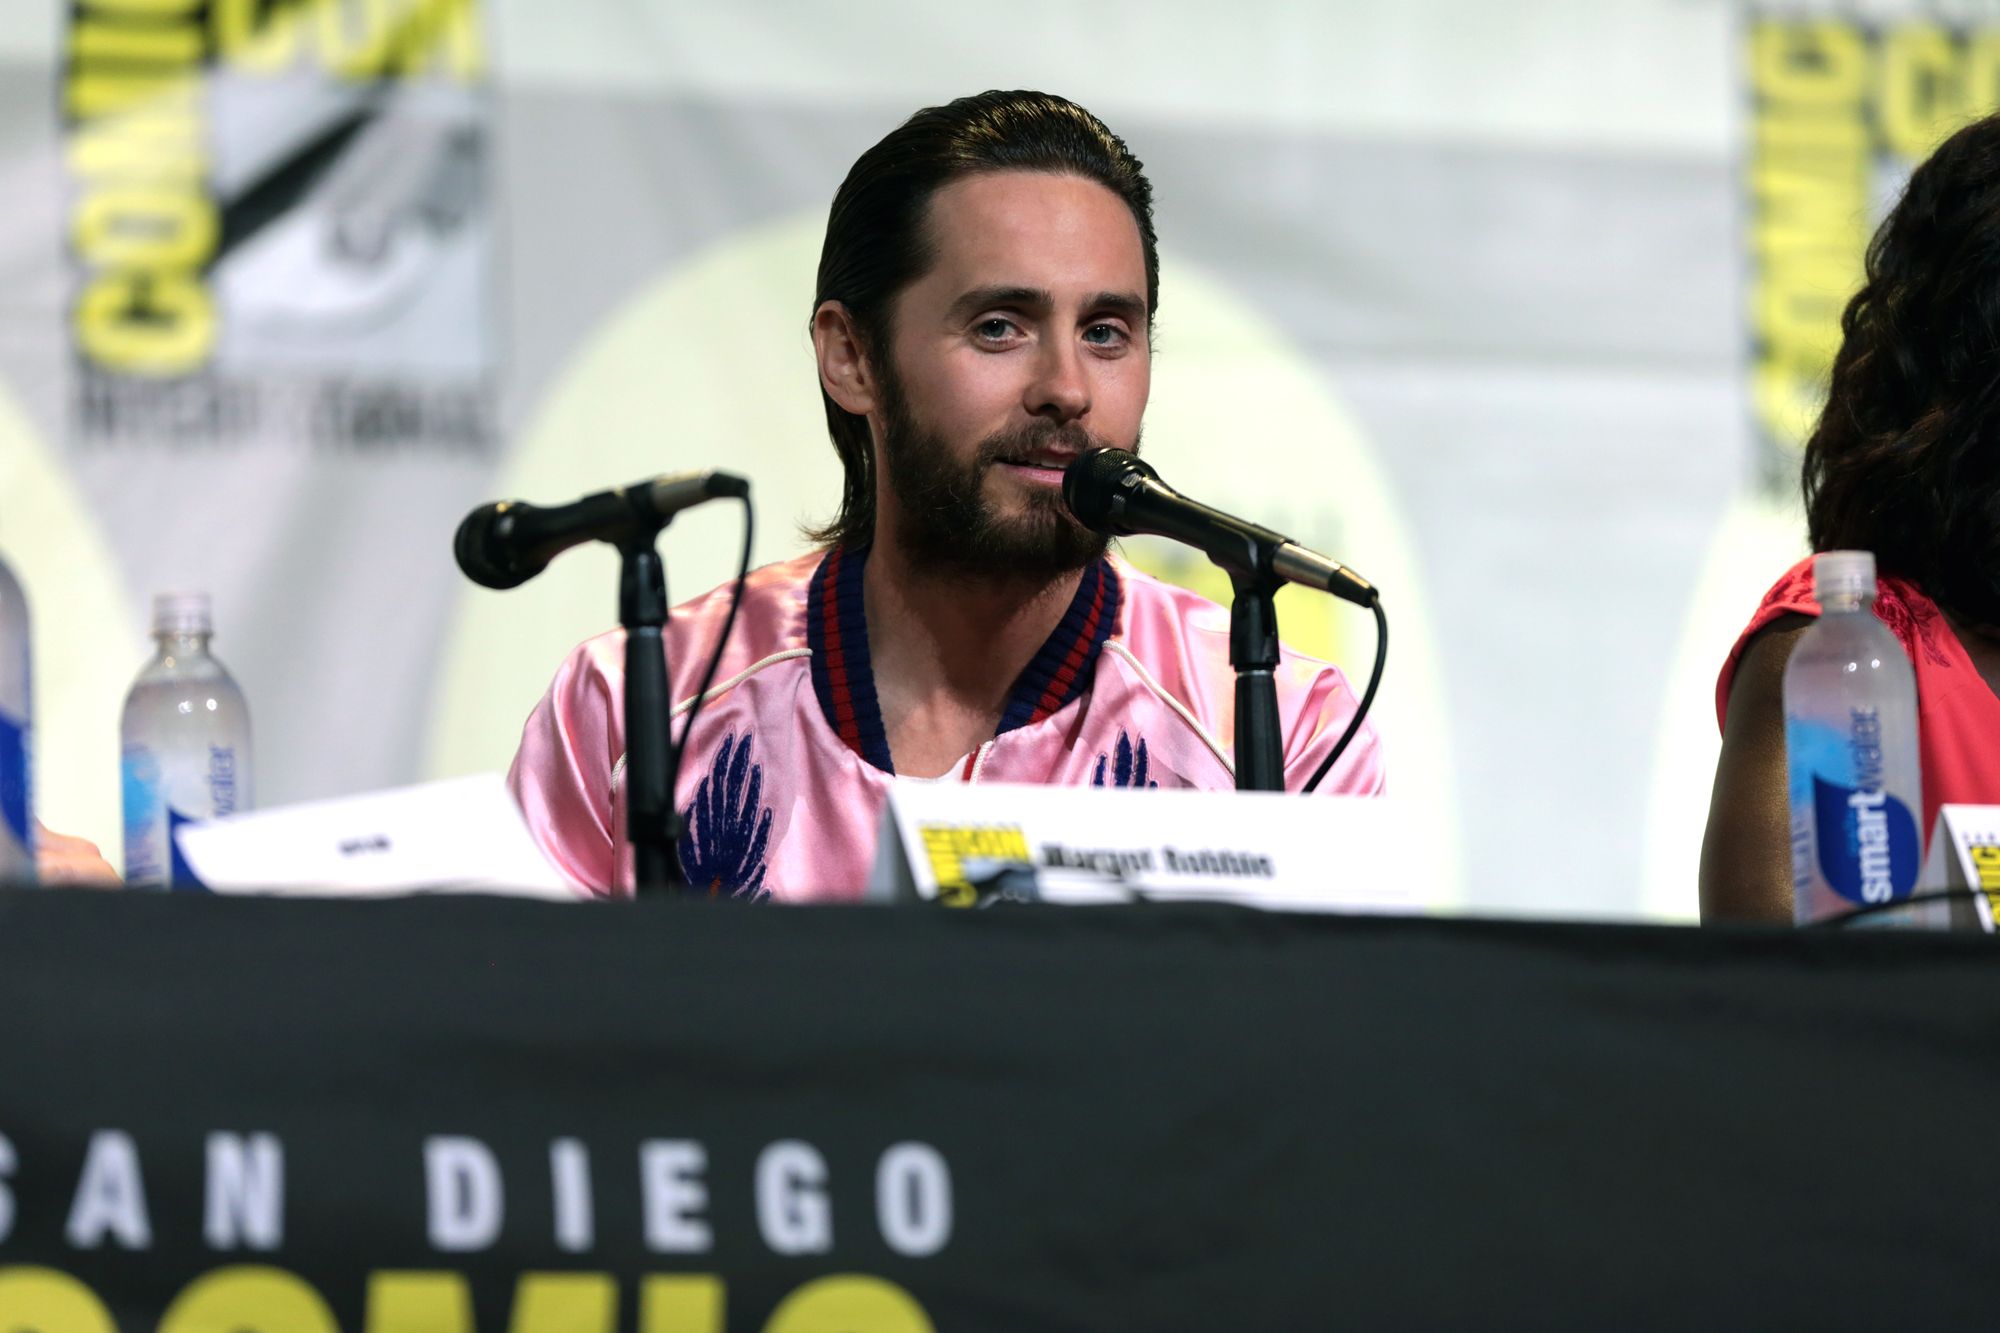 Jared Leto speaking at the 2016 San Diego Comic Con International